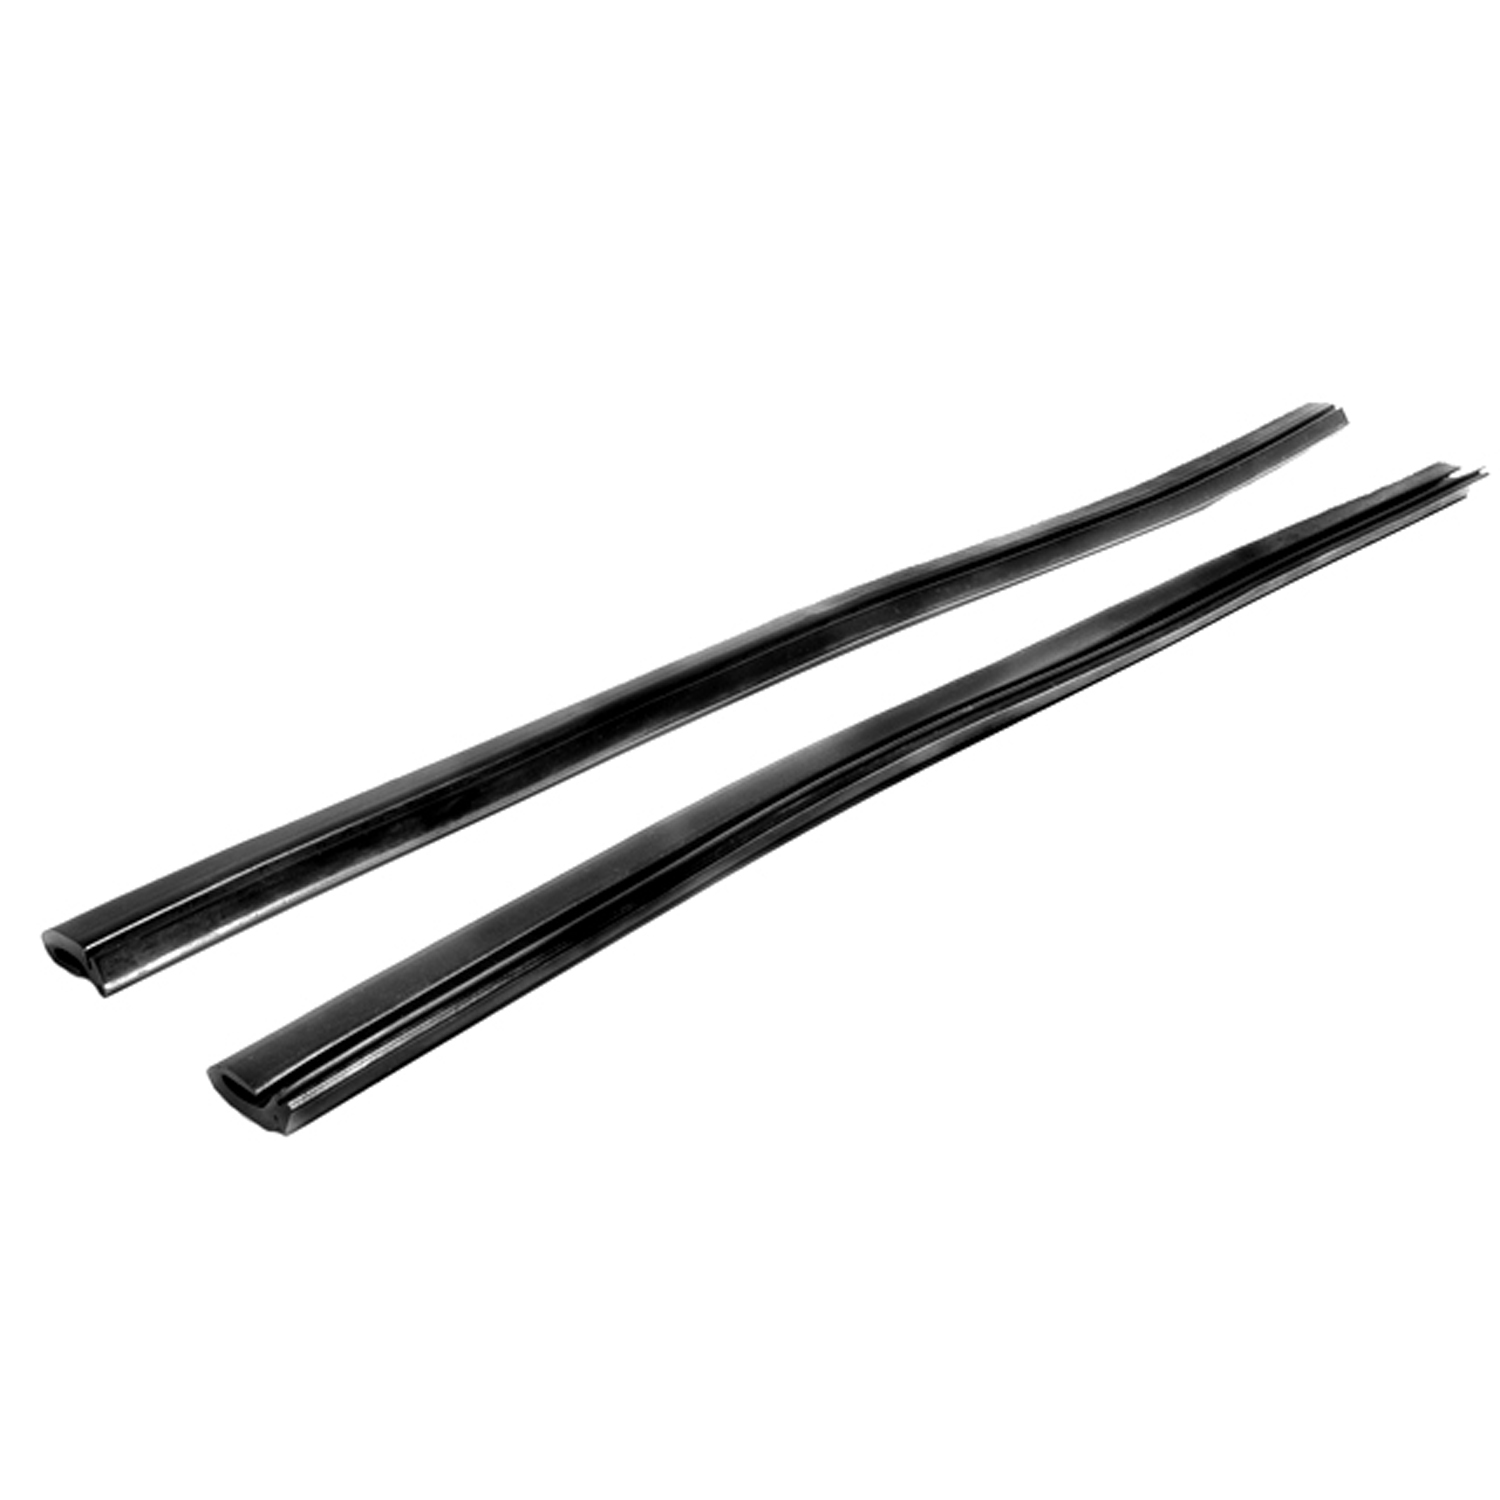 1967 Chevrolet Malibu Rear Side Roll-Up Window Seal, for Hardtops and Convertibles-VS 3